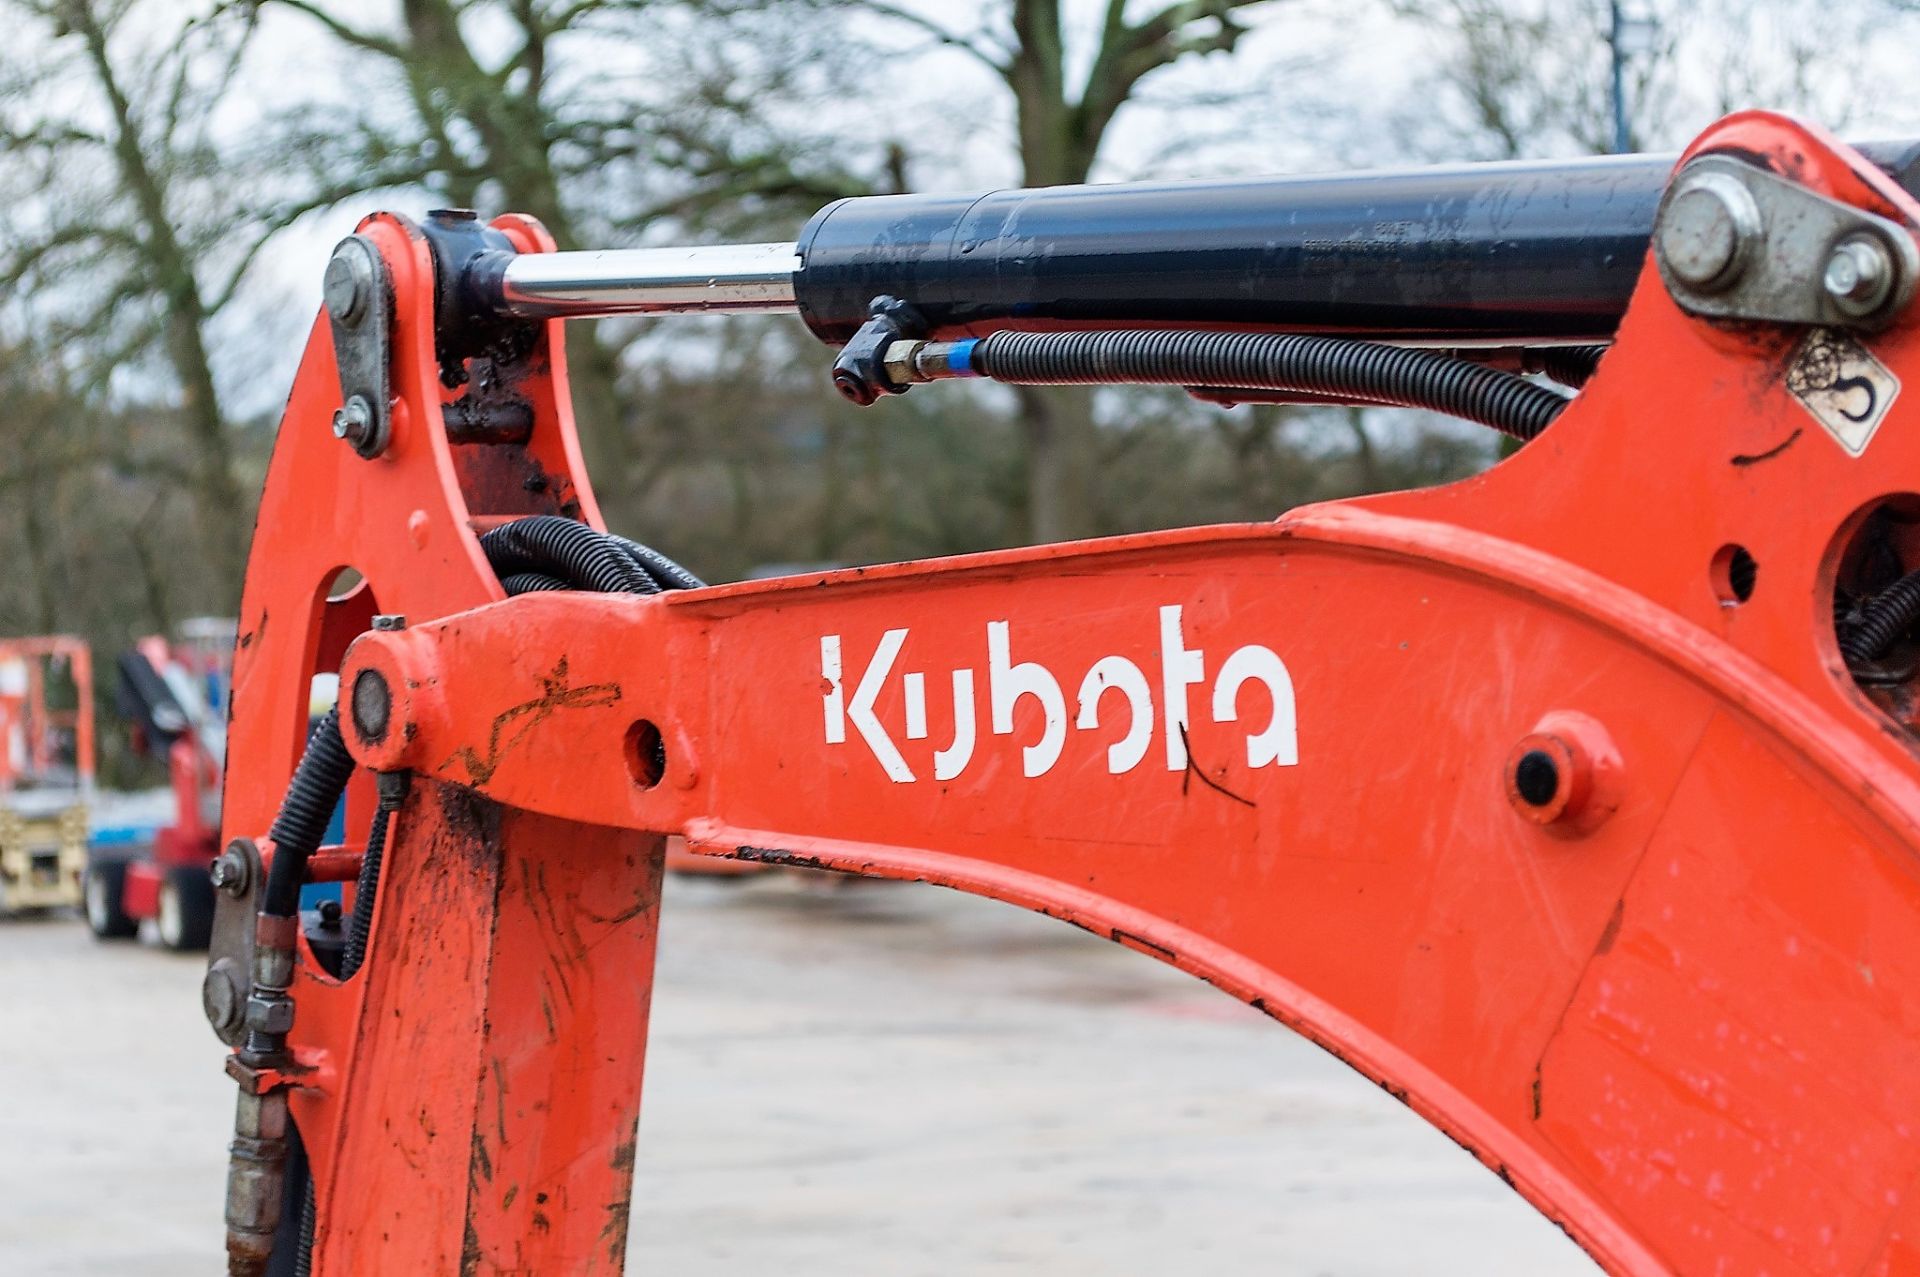 Kubota KX016-4 1.5 tonne rubber tracked excavator Year: 2014 S/N: 57592 Recorded Hours: 2375 - Image 12 of 23